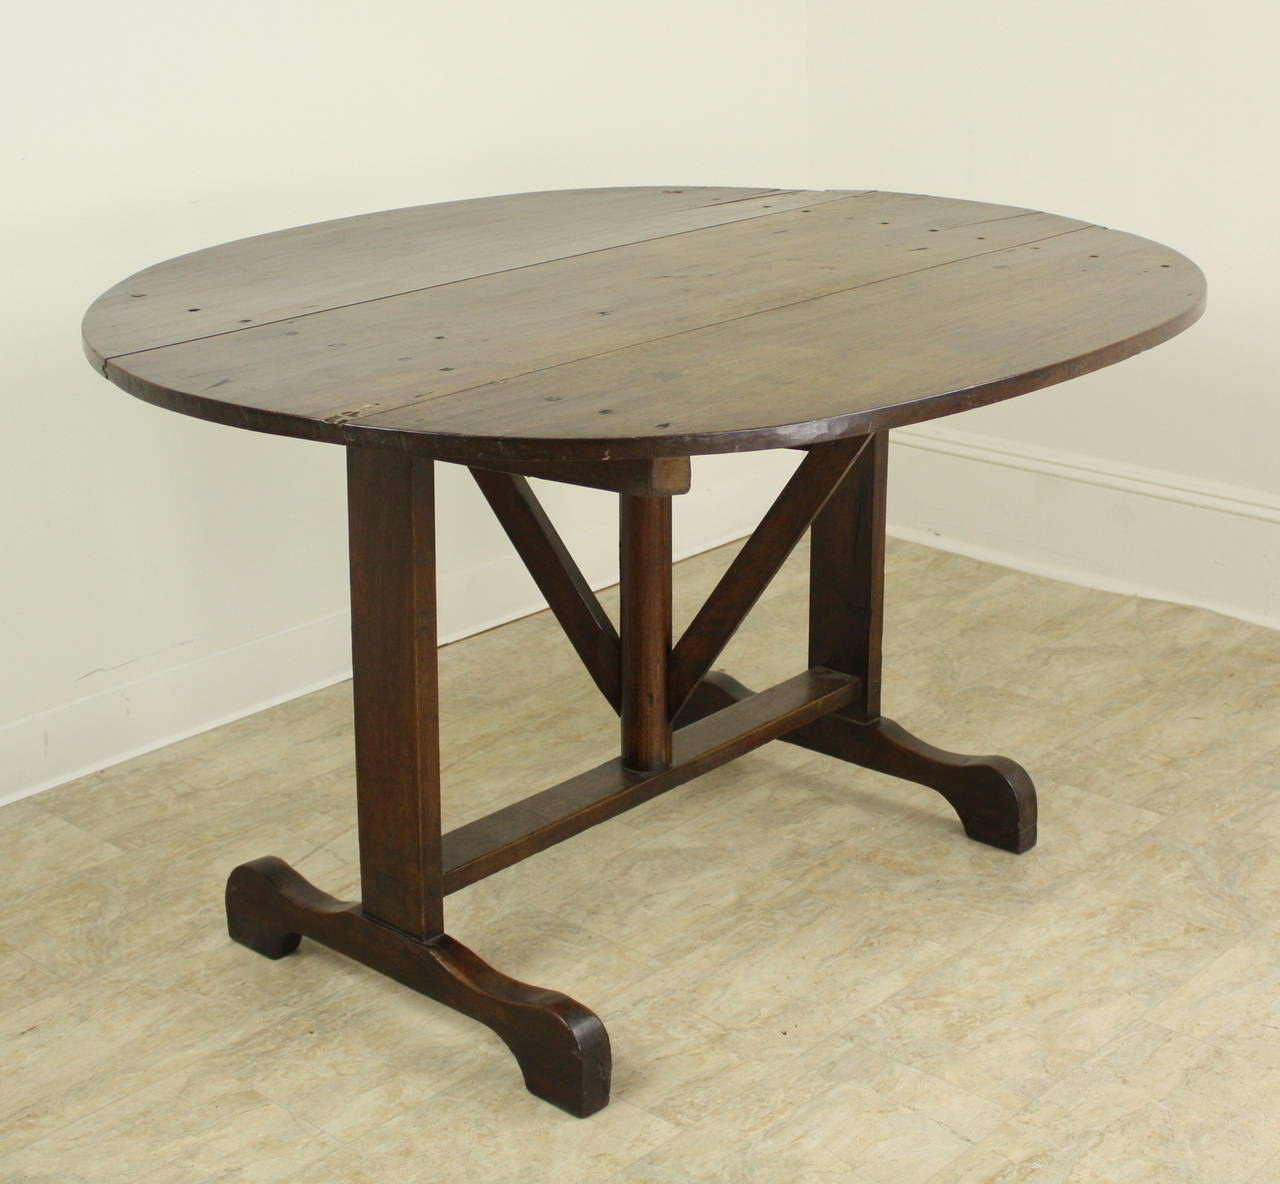 With a width of fifty inches, this lovely oval table will provide good seating for six, and has the advantage of not having an apron to get in the way of knees or chairs. The vendange table, typically used in the wine tasting room at the vineyard,